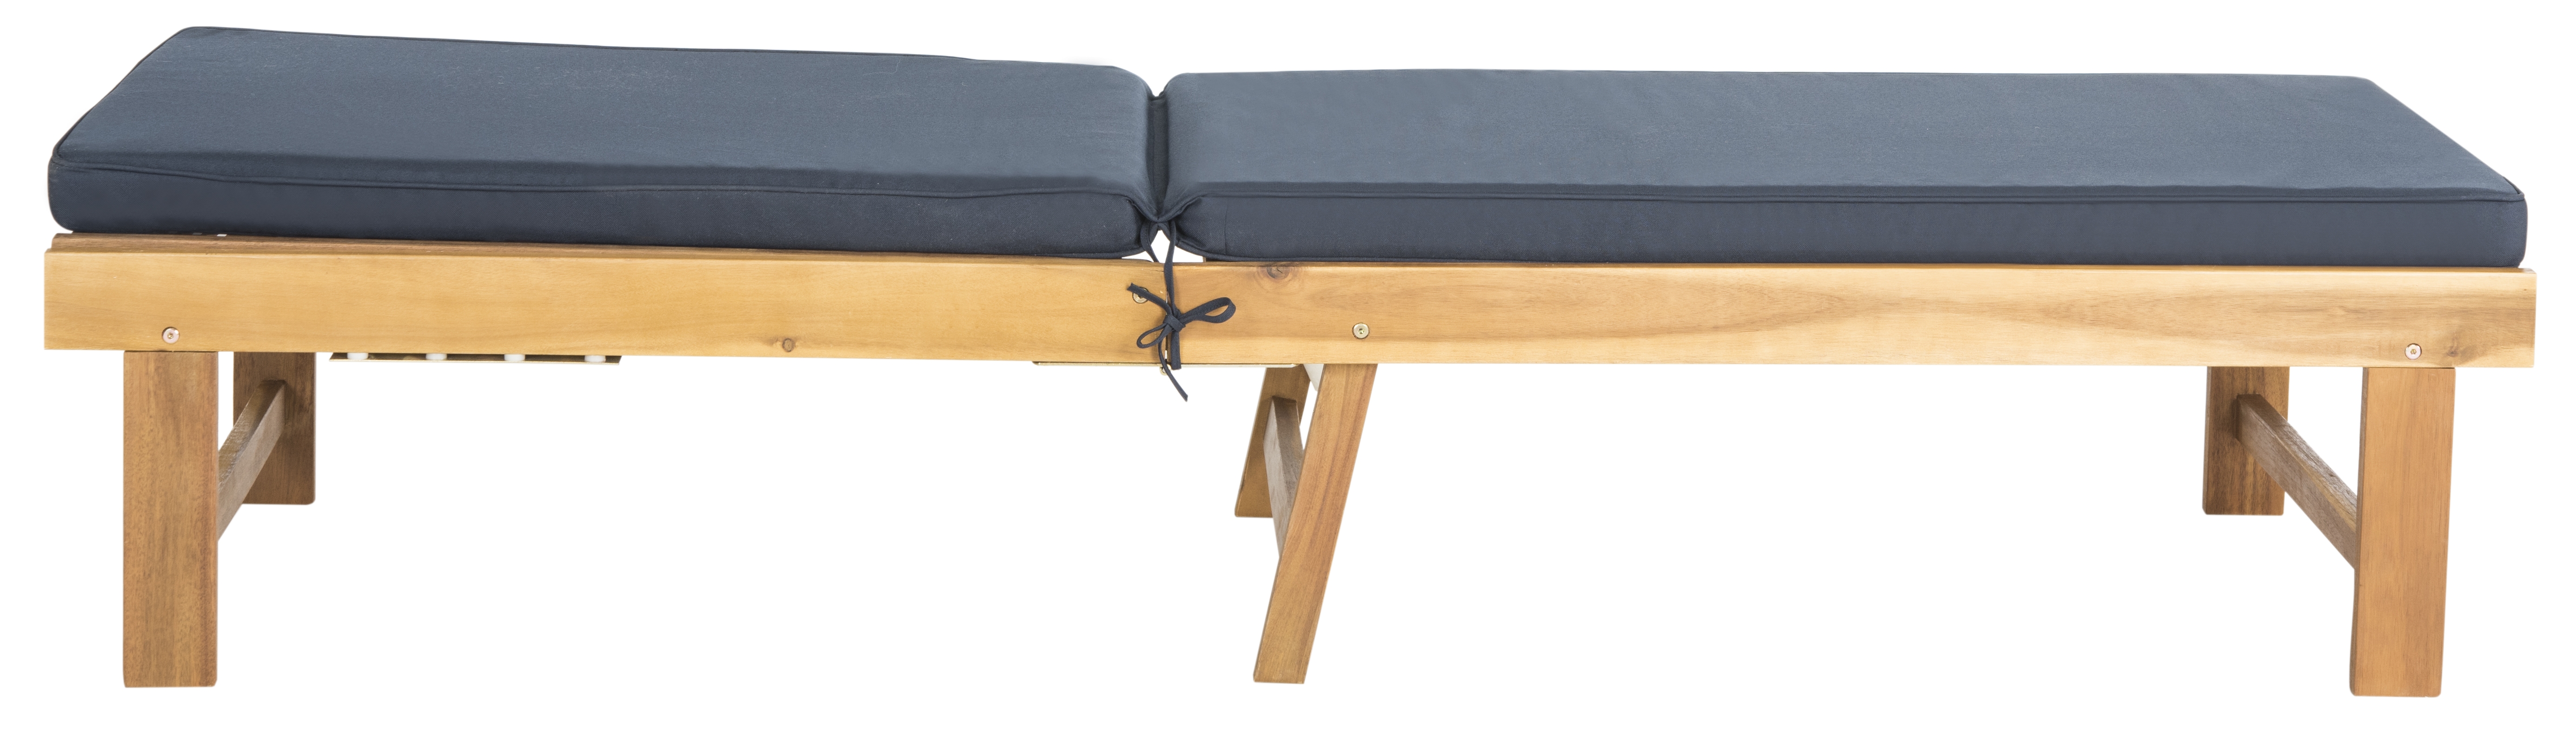 Inglewood Chaise Lounge Chair - Natural/Navy - Safavieh - Image 3